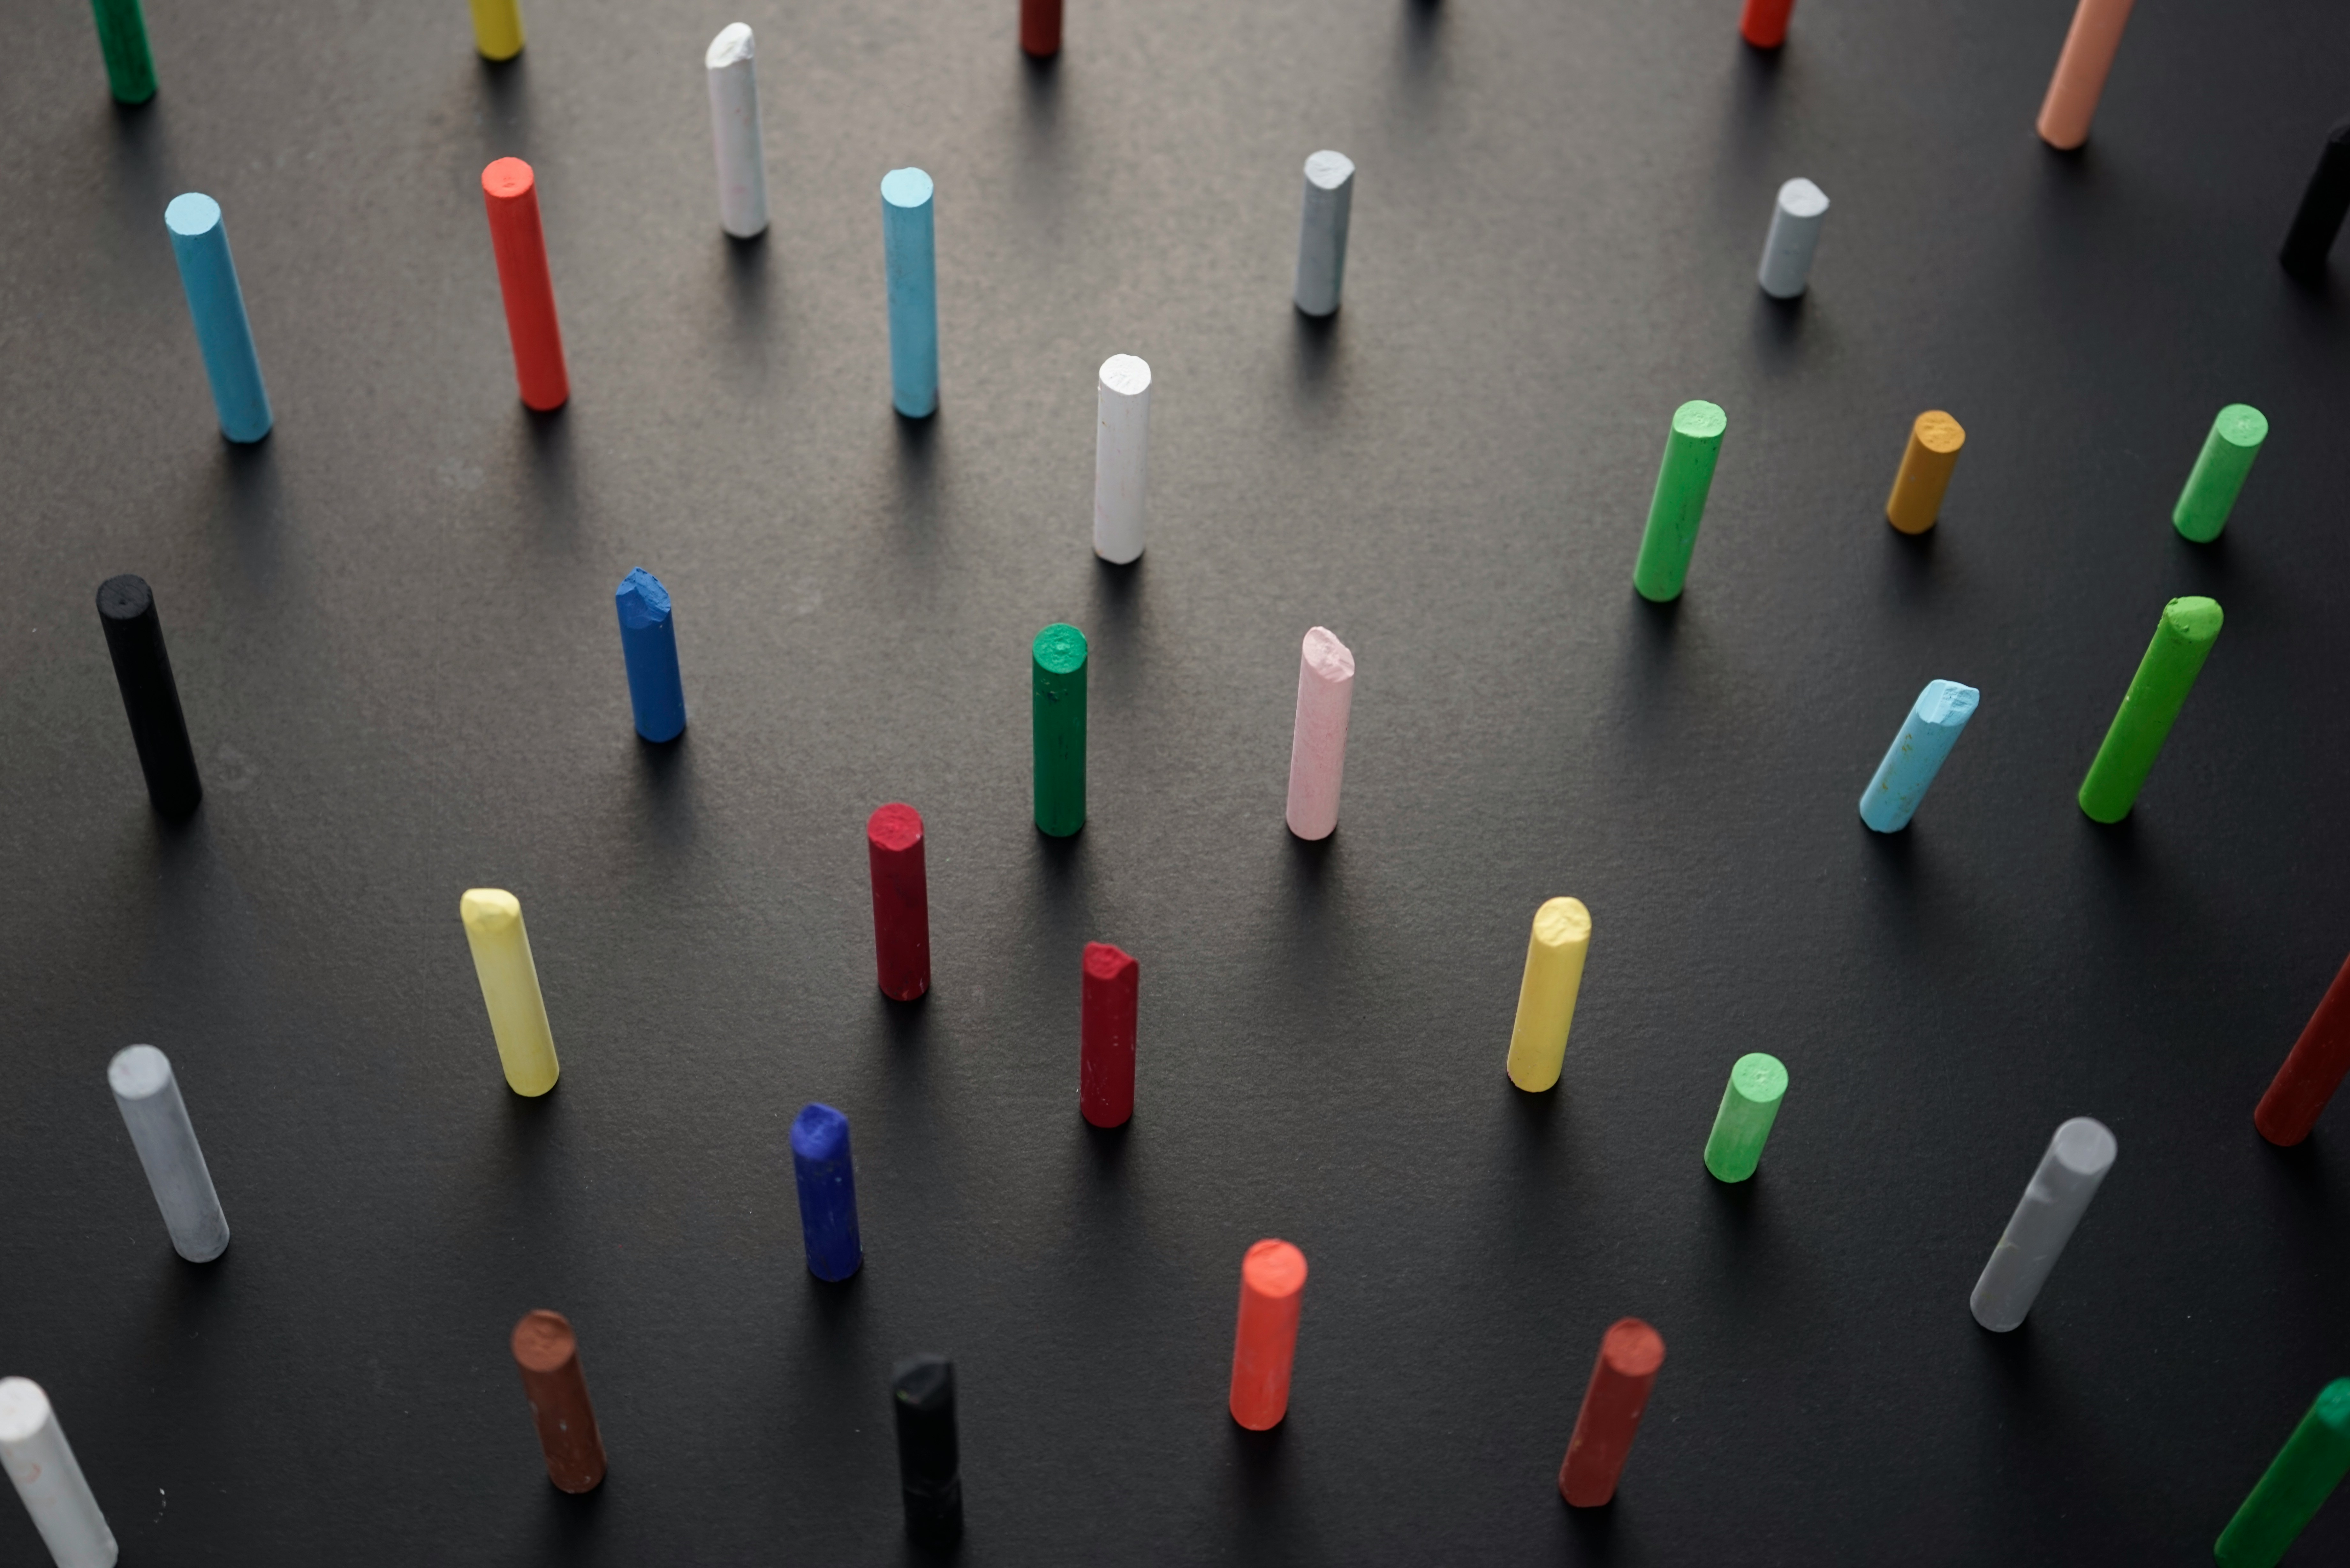 A variety of colorpul pieces of chalk stand upright on a dark grey surface